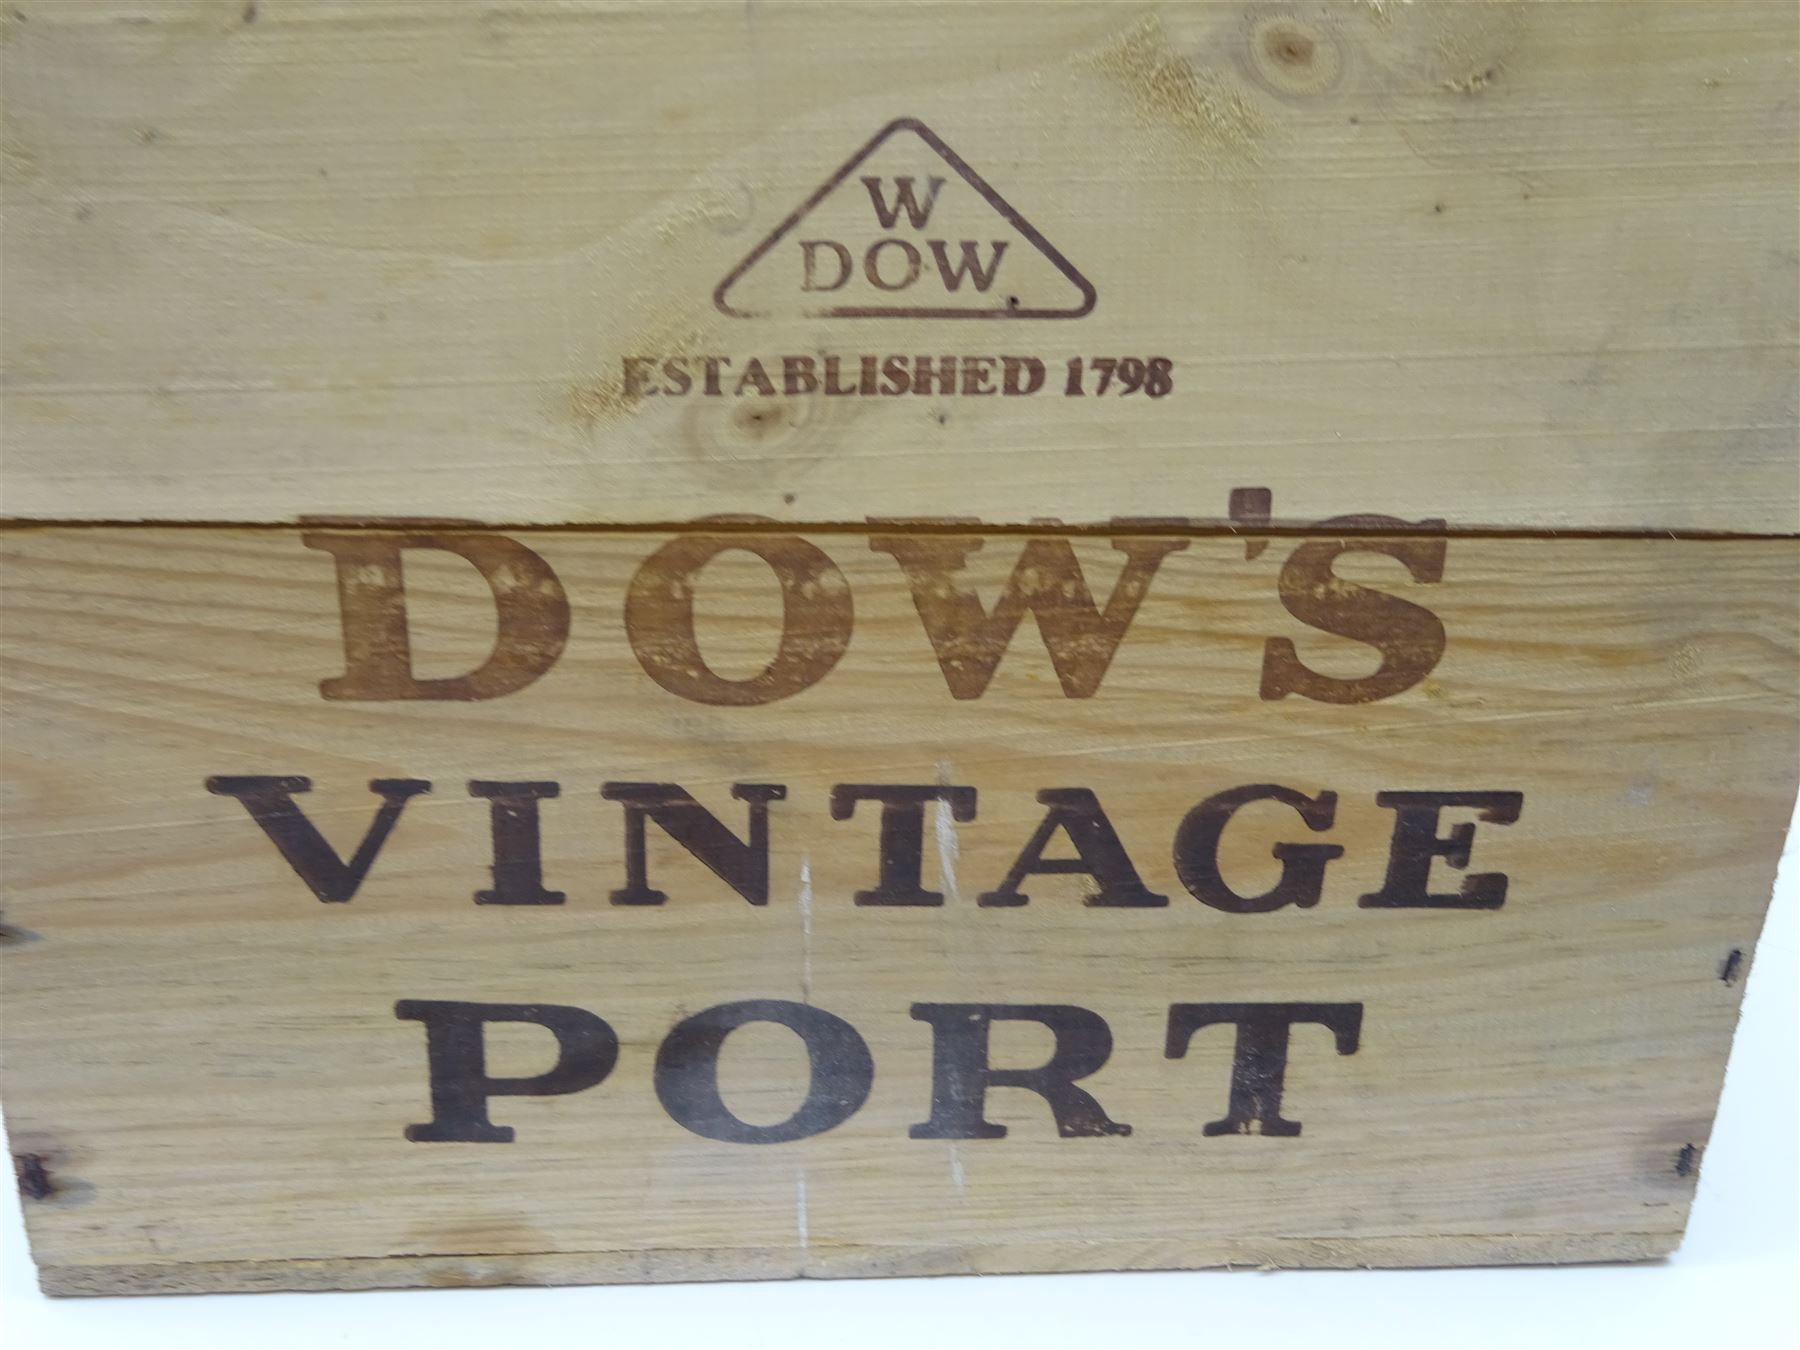 Dow's 1983 vintage port - Image 2 of 5